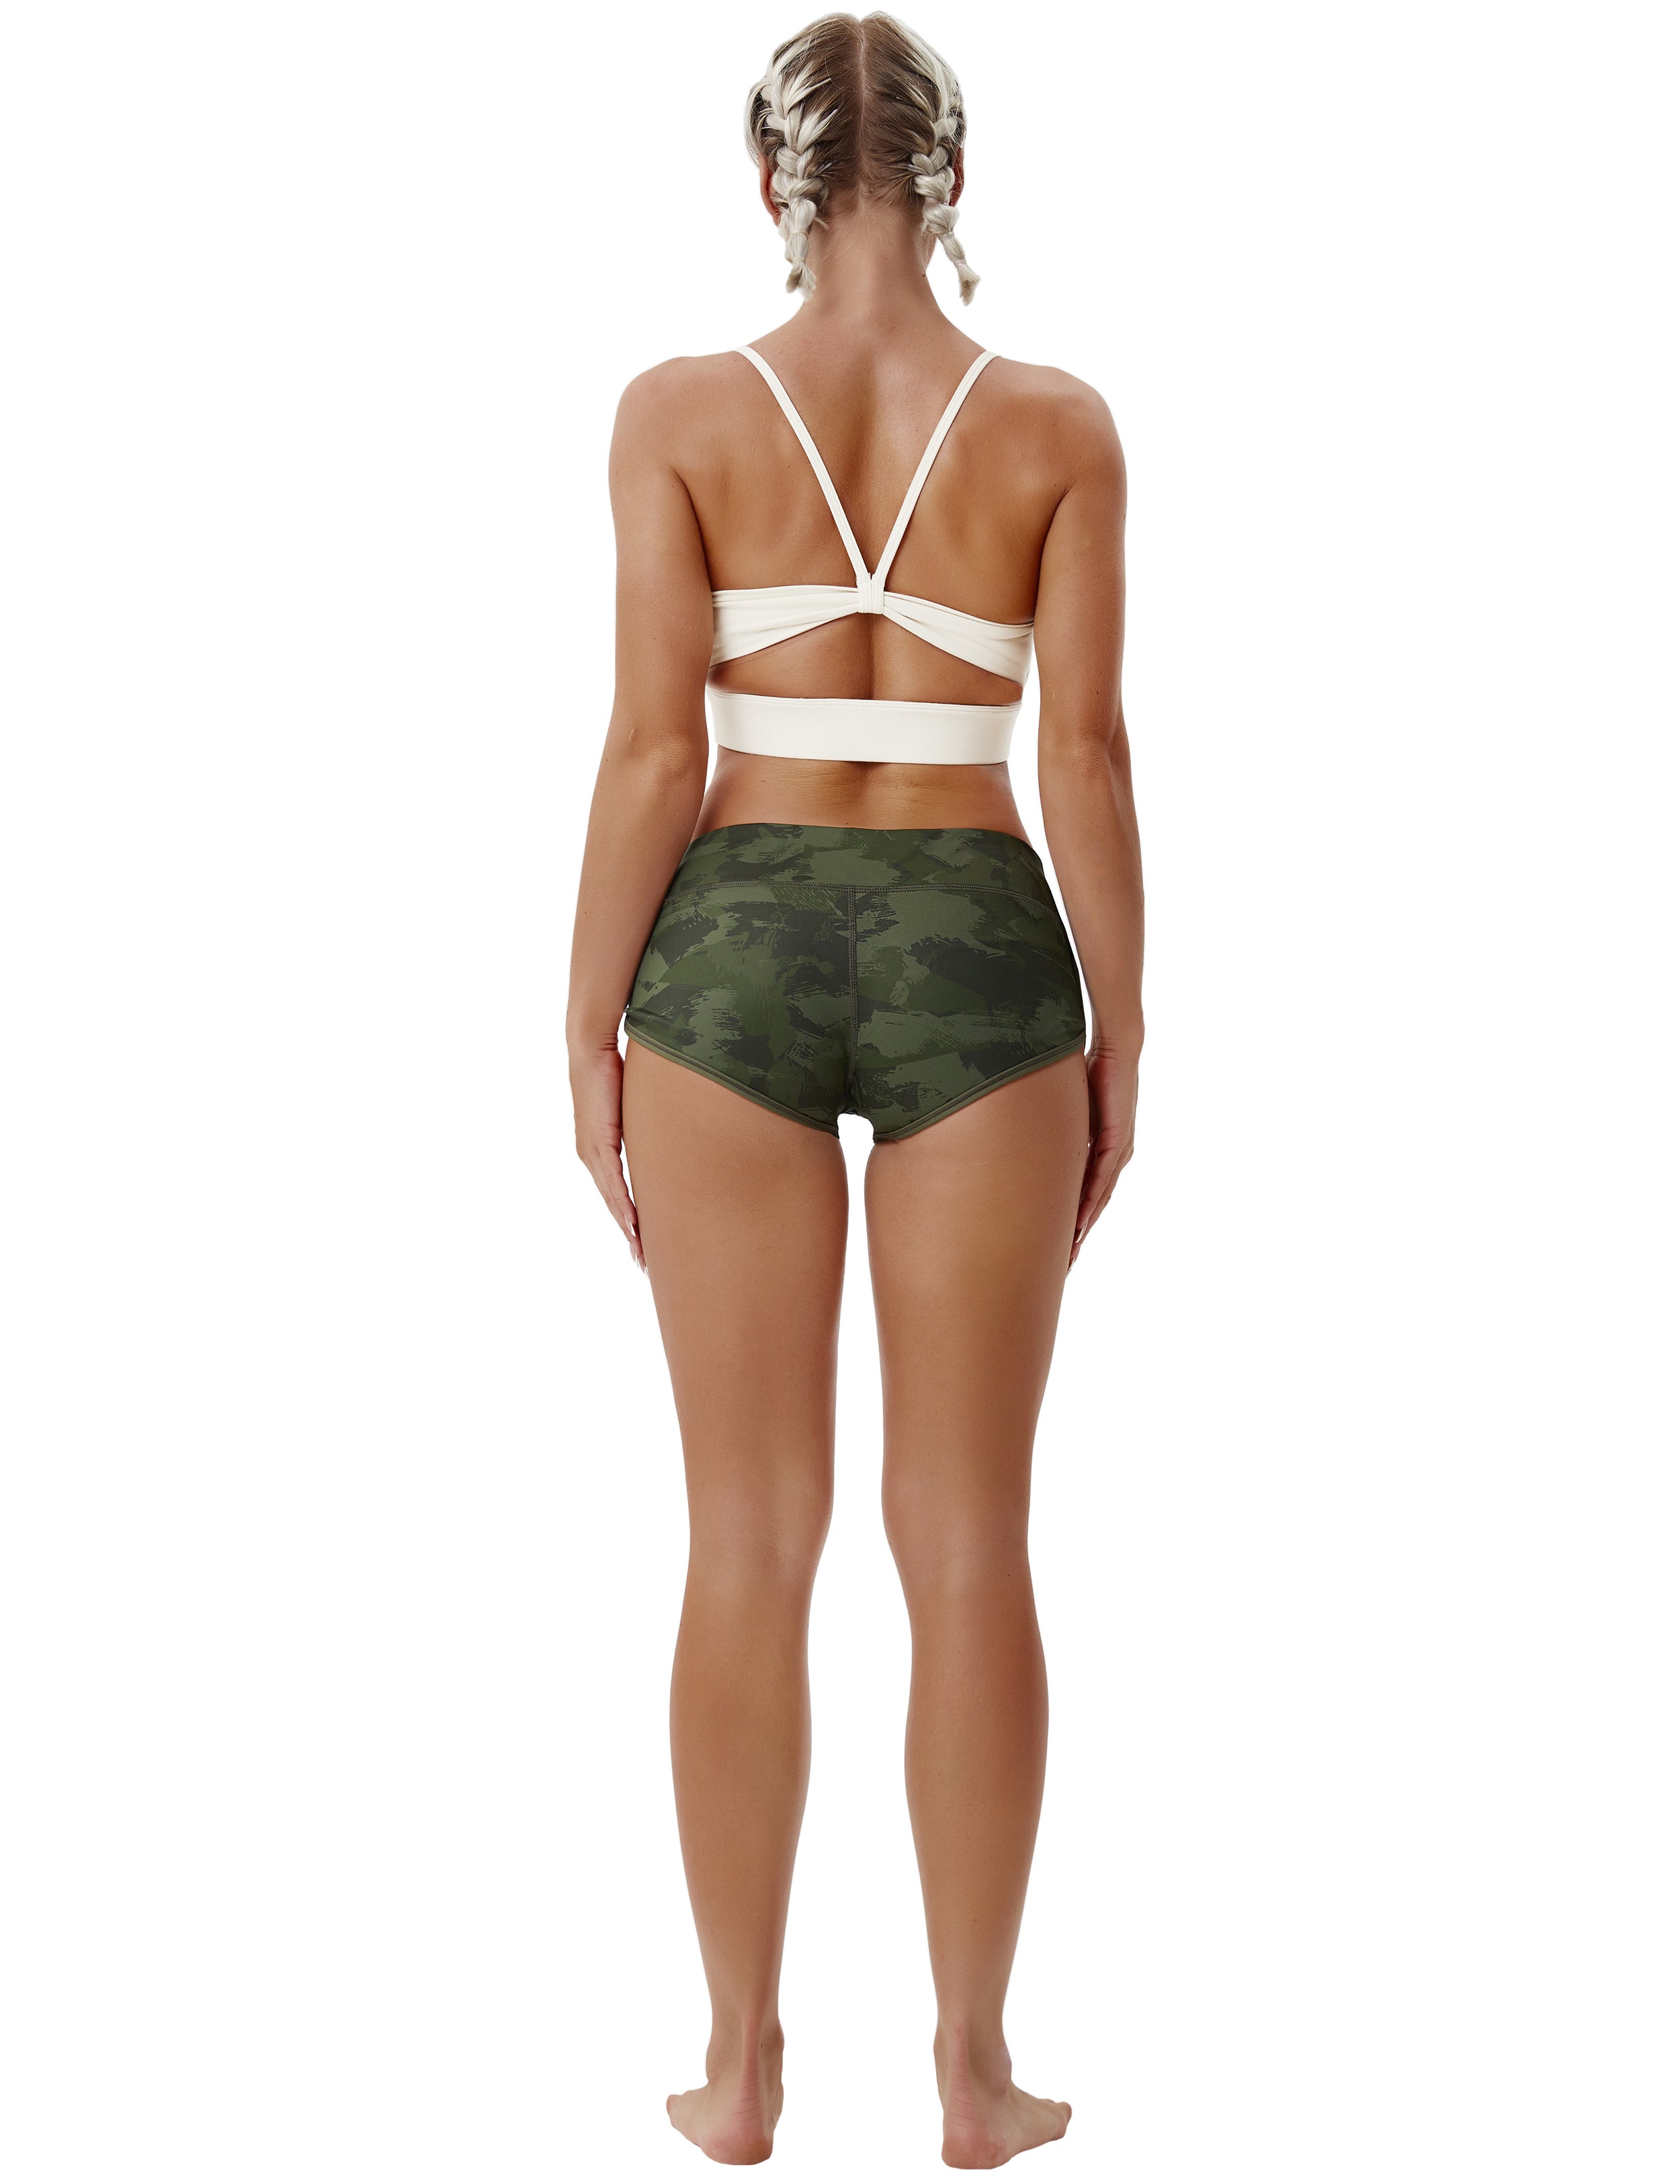 Printed Booty Yoga Shorts green brushcamo Sleek, soft, smooth and totally comfortable: our newest sexy style is here. Softest-ever fabric High elasticity High density 4-way stretch Fabric doesn't attract lint easily No see-through Moisture-wicking Machine wash 78% Polyester, 22% Spandex